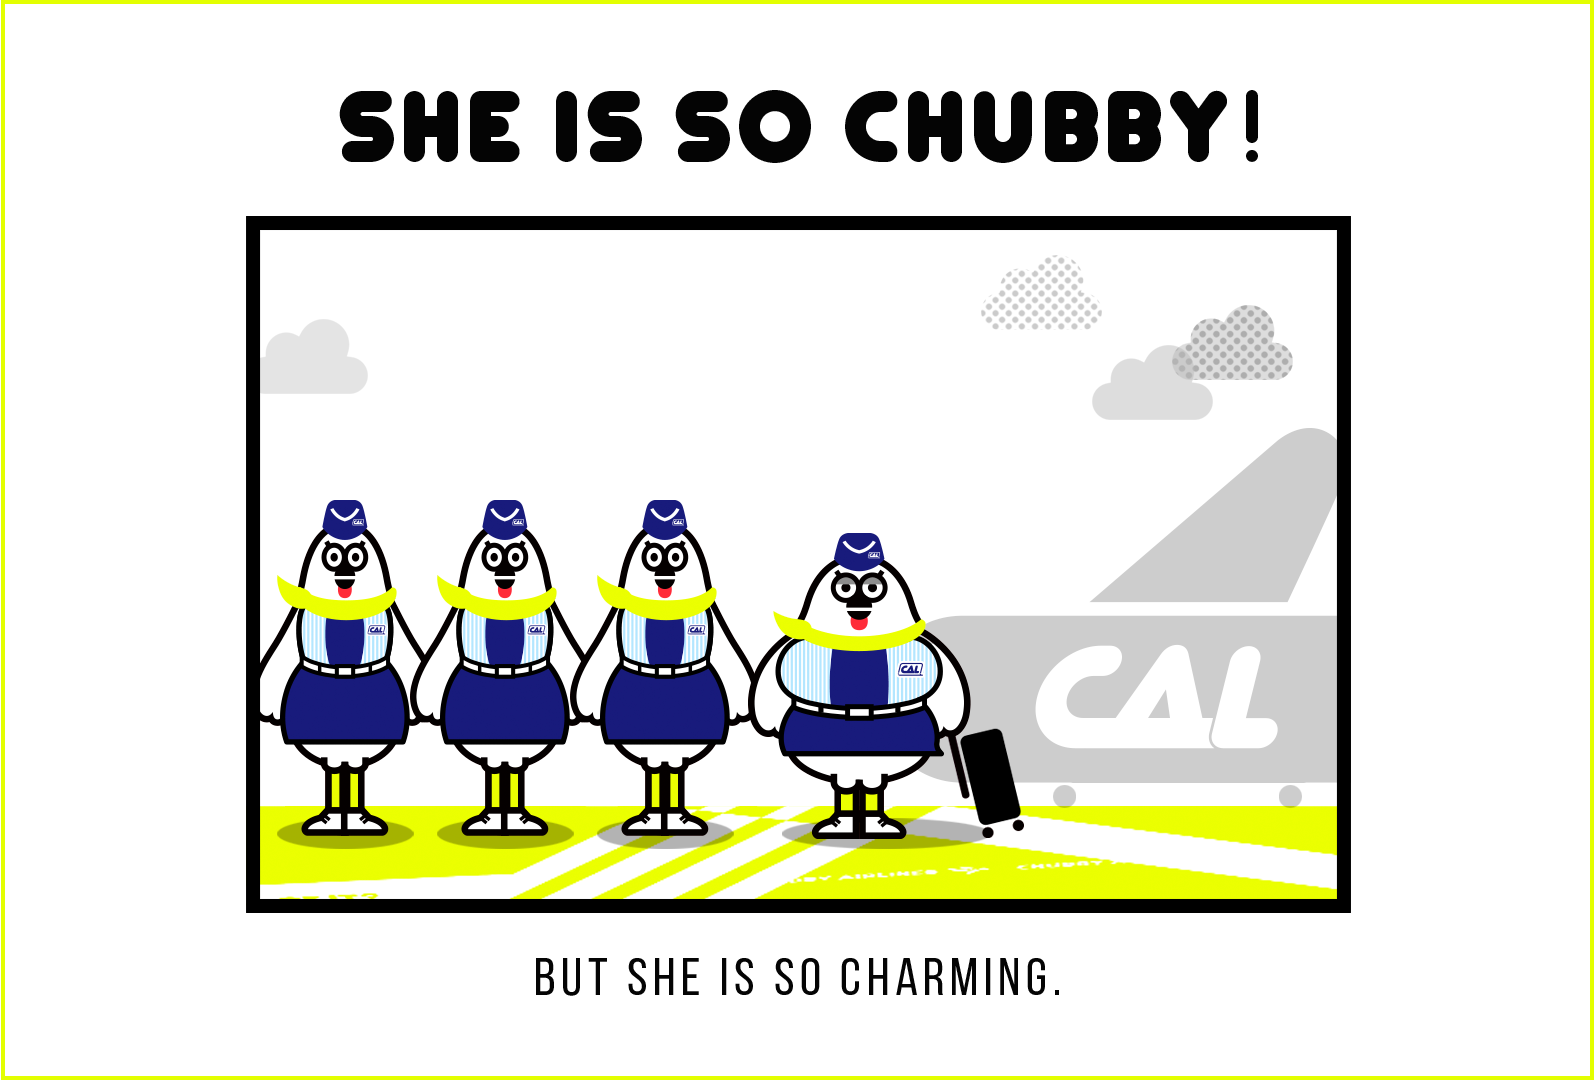 What's CHUBBY AIRLINES？